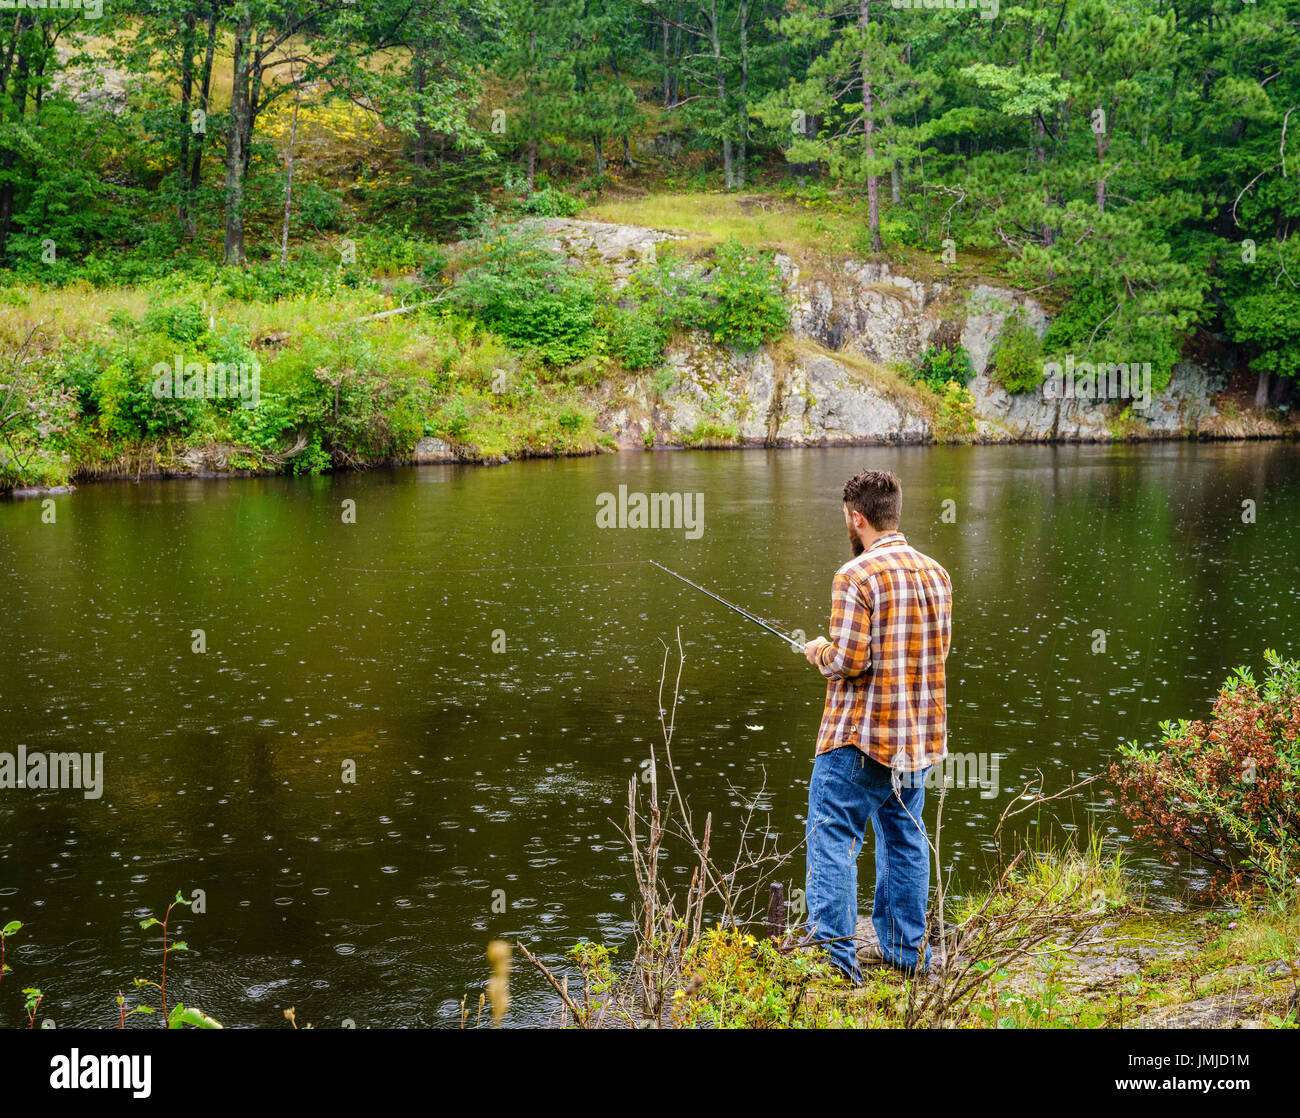 Upper Peninsula, Michigan, August 11, 2016: a dedicated angler is fishing on a river near Marquette, Michigan Stock Photo